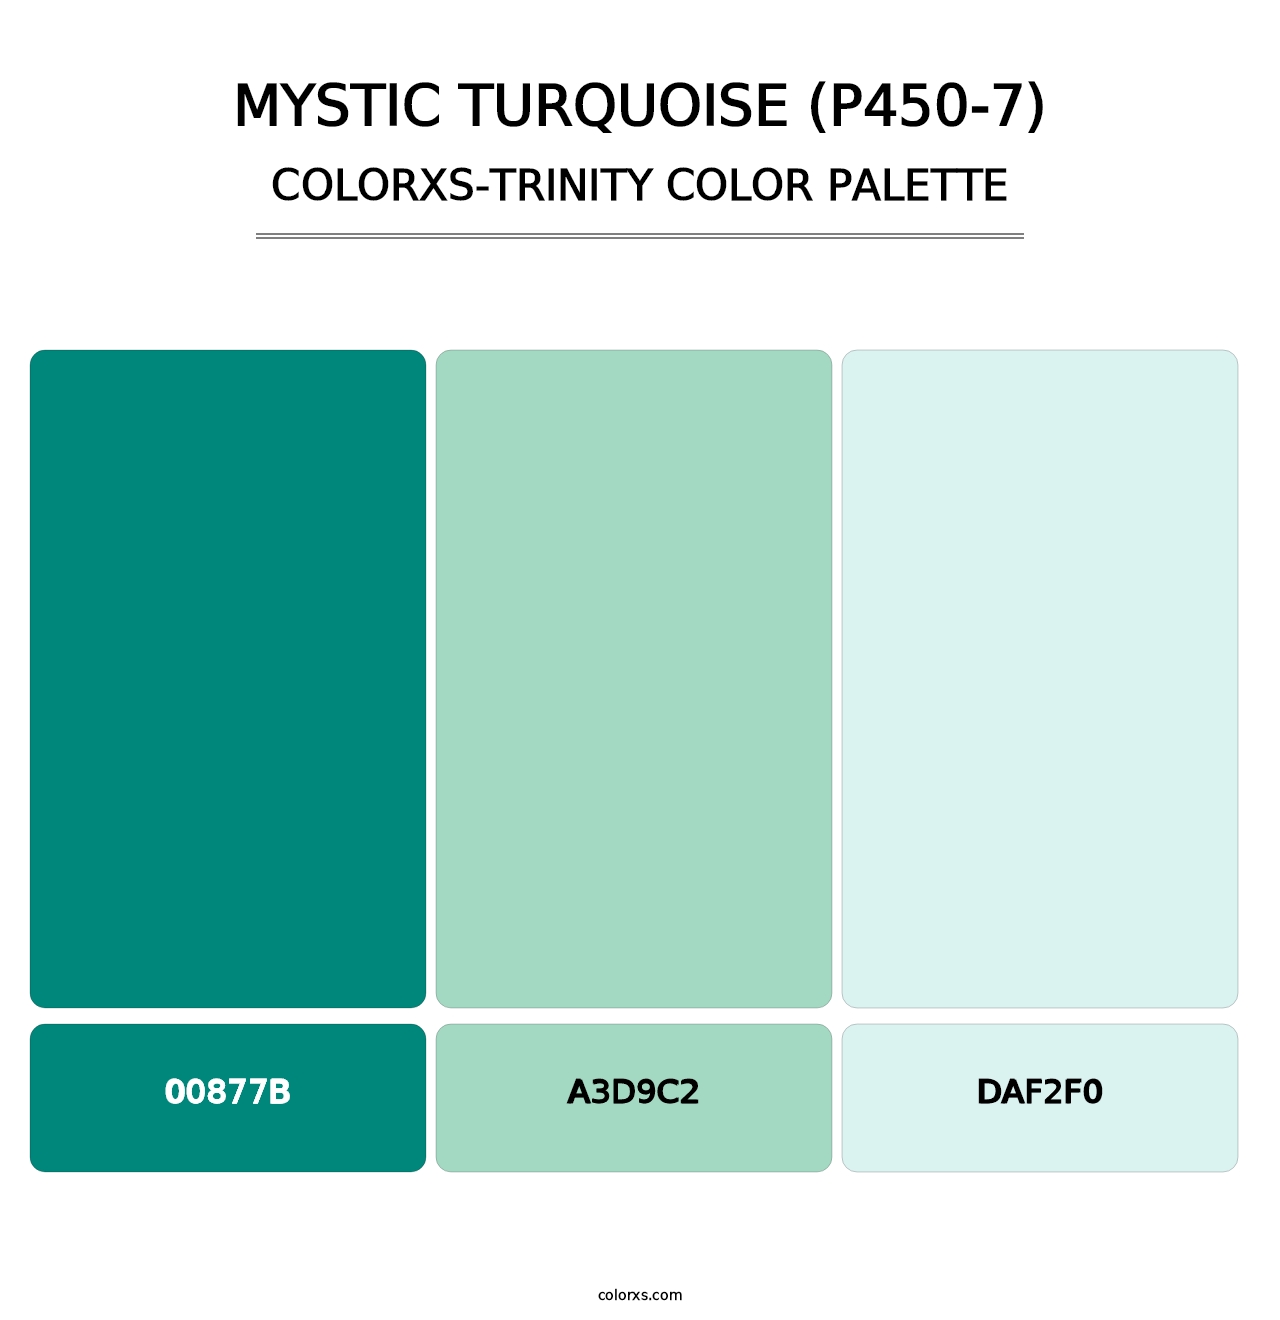 Mystic Turquoise (P450-7) - Colorxs Trinity Palette